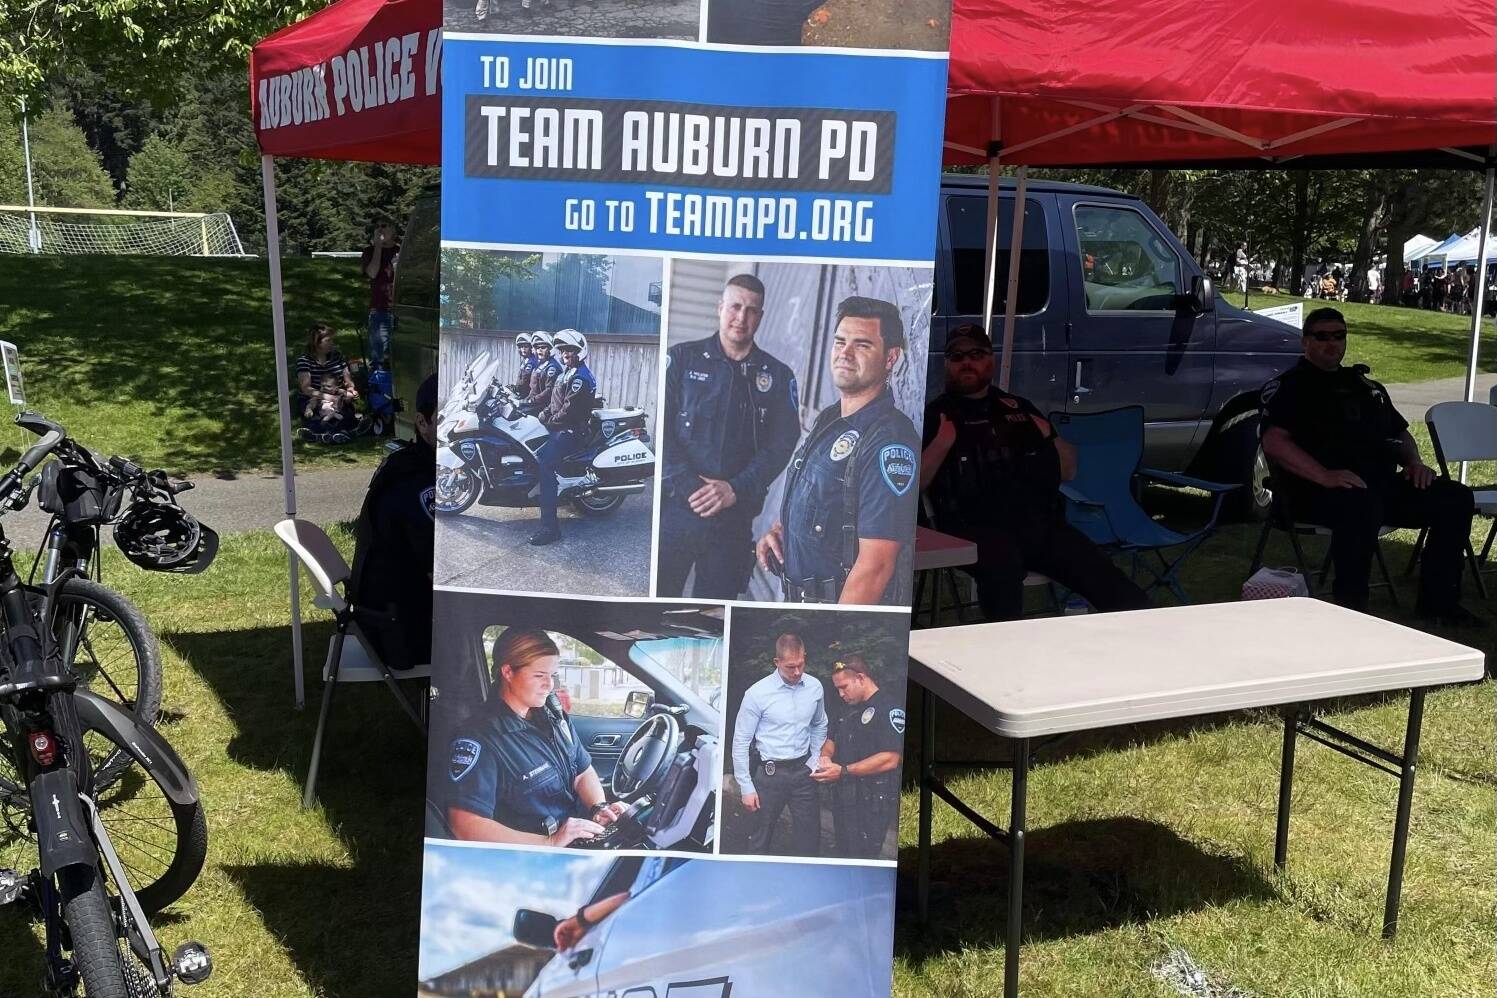 Photo of promotional recruitment banner used by Auburn Police Department at Petpalooza. The banner features Auburn Police Officer Jeff Nelson, who is awaiting trial for the 2019 murder and assault of Jesse Sarey. Photo courtesy of Jeff Trimble